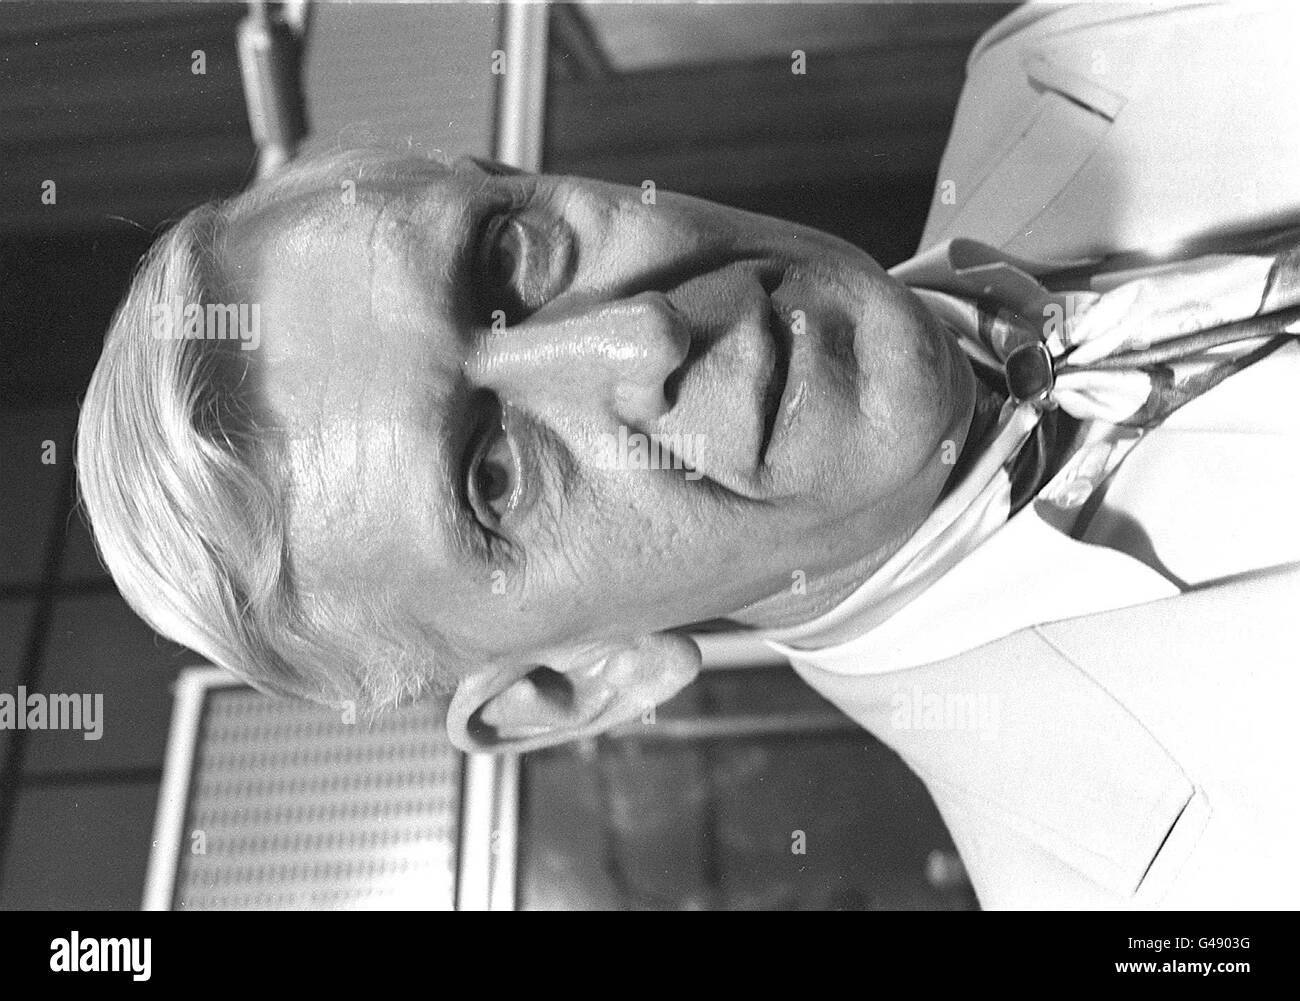 Library file 193267-1, dated 6.8.80. BBC Radio actor Jack May, who played the character Nelson Gabriel in the BBC Radio 4 series The Archers. Mr May, who was in the series for 46 years, has died, aged 75. See PA story DEATH May. /PA **Available b/w only.** Stock Photo